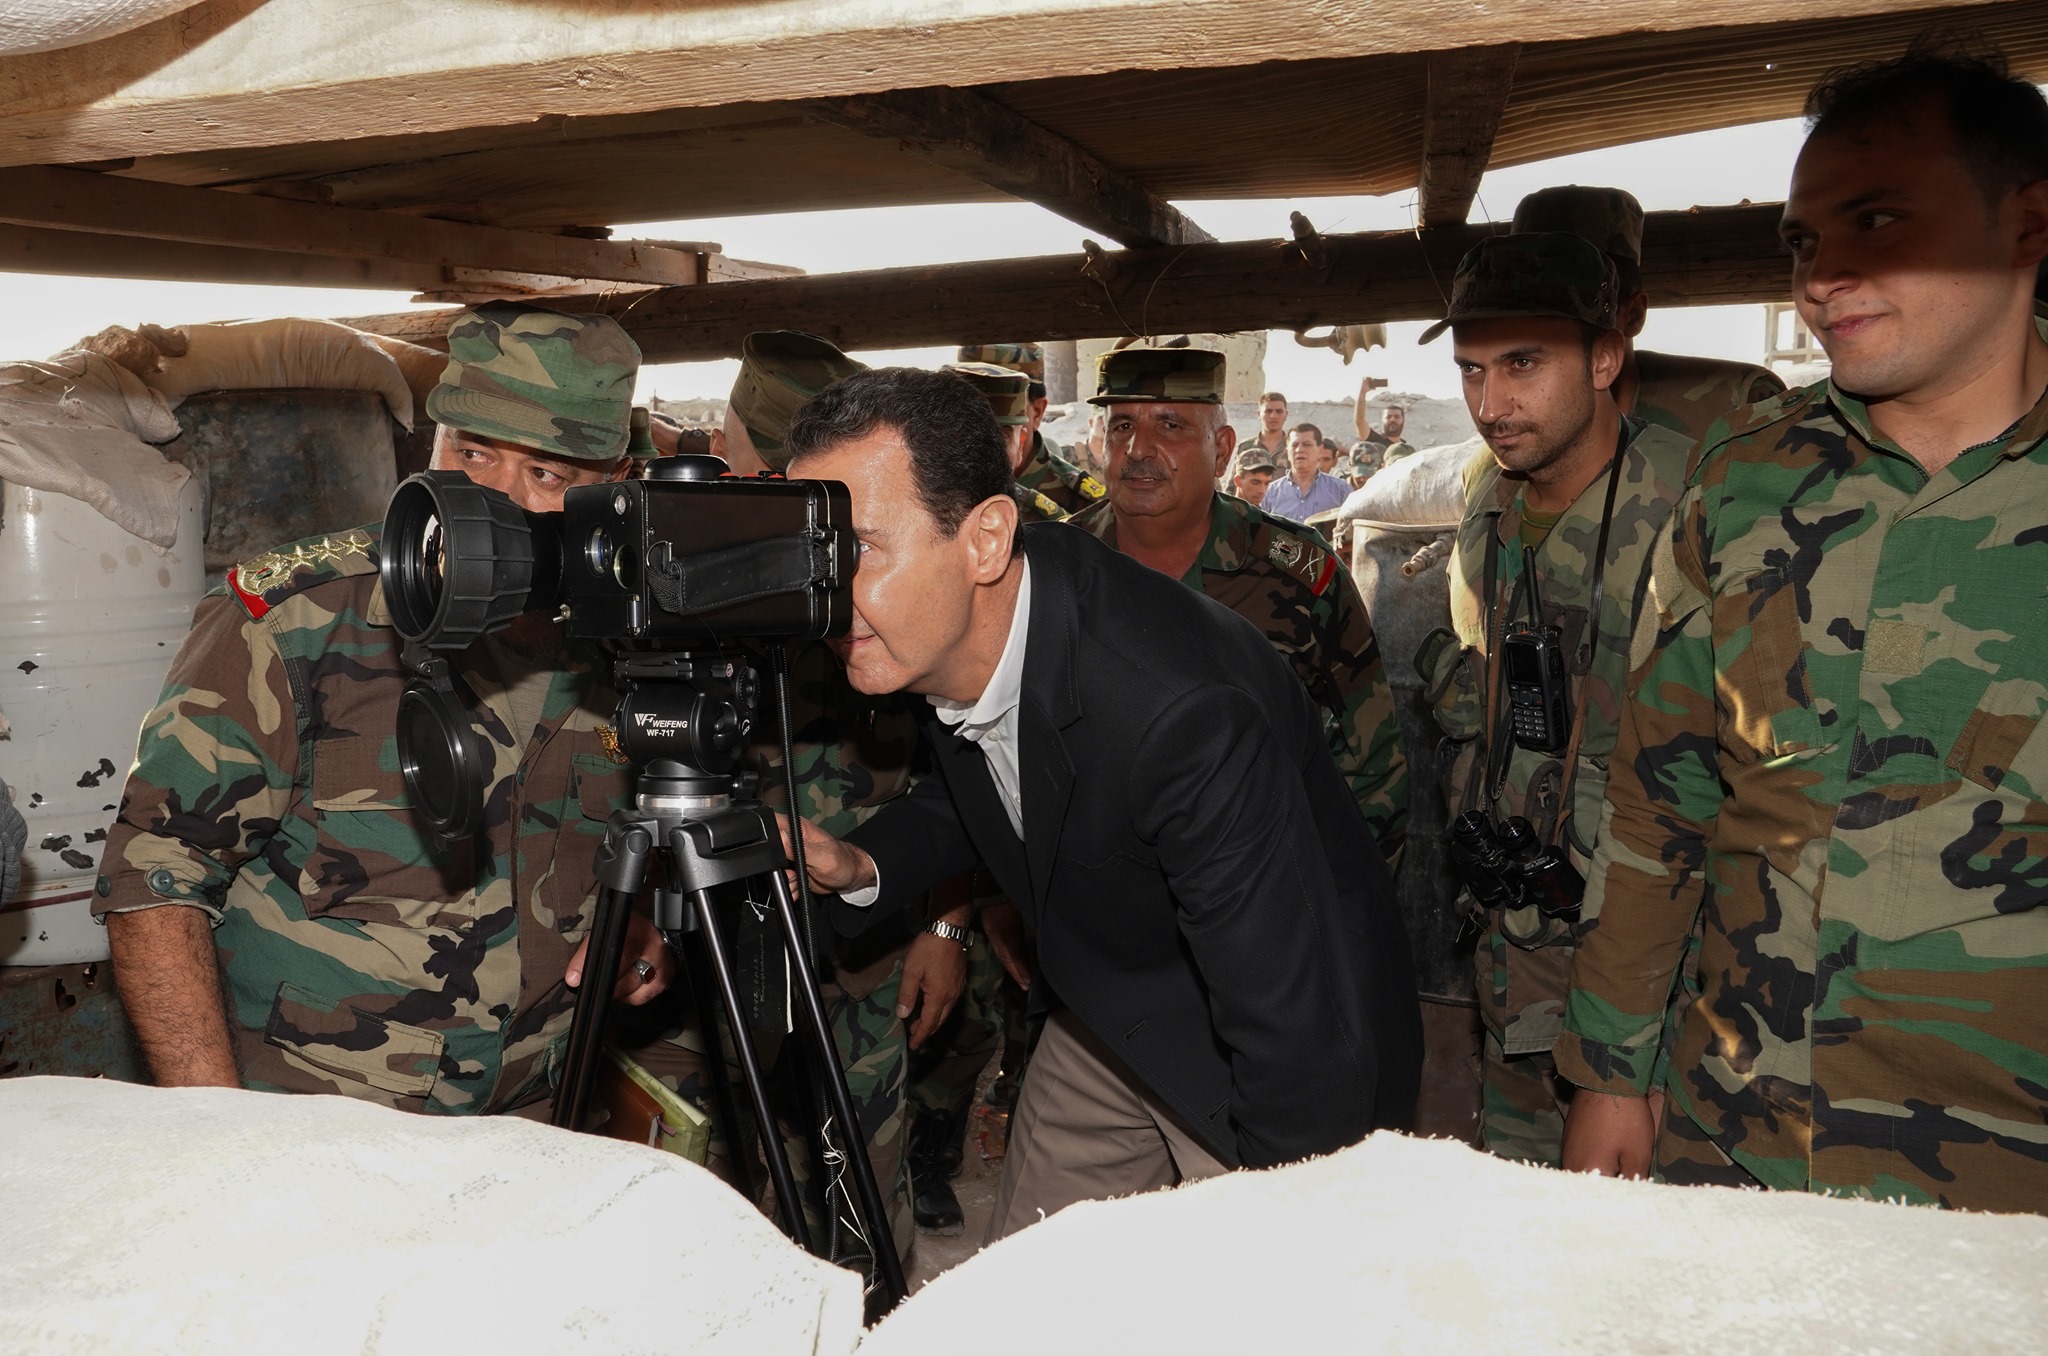 Syrian President al-Assad visits the government troops in Idlib